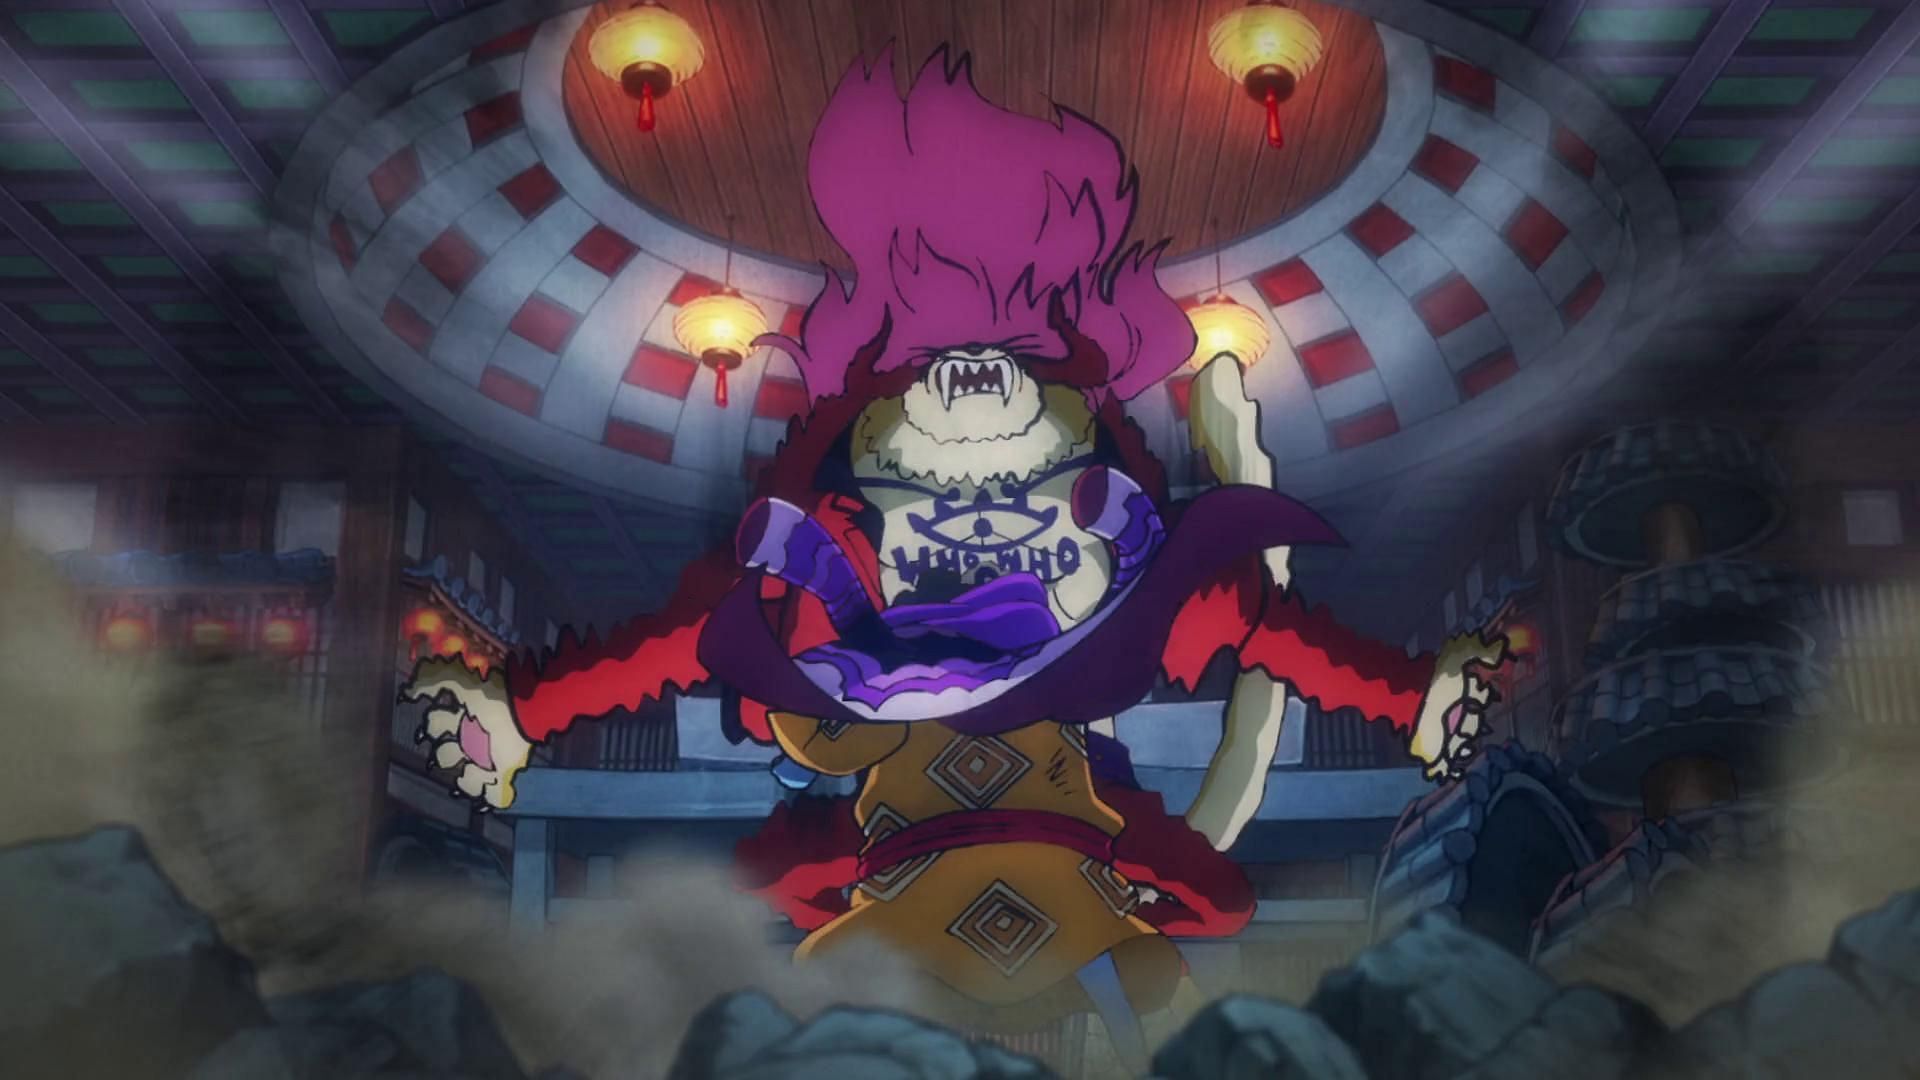 Jinbe vs Who&#039;s Who as seen in One Piece (Image via Toei Animation, One Piece)